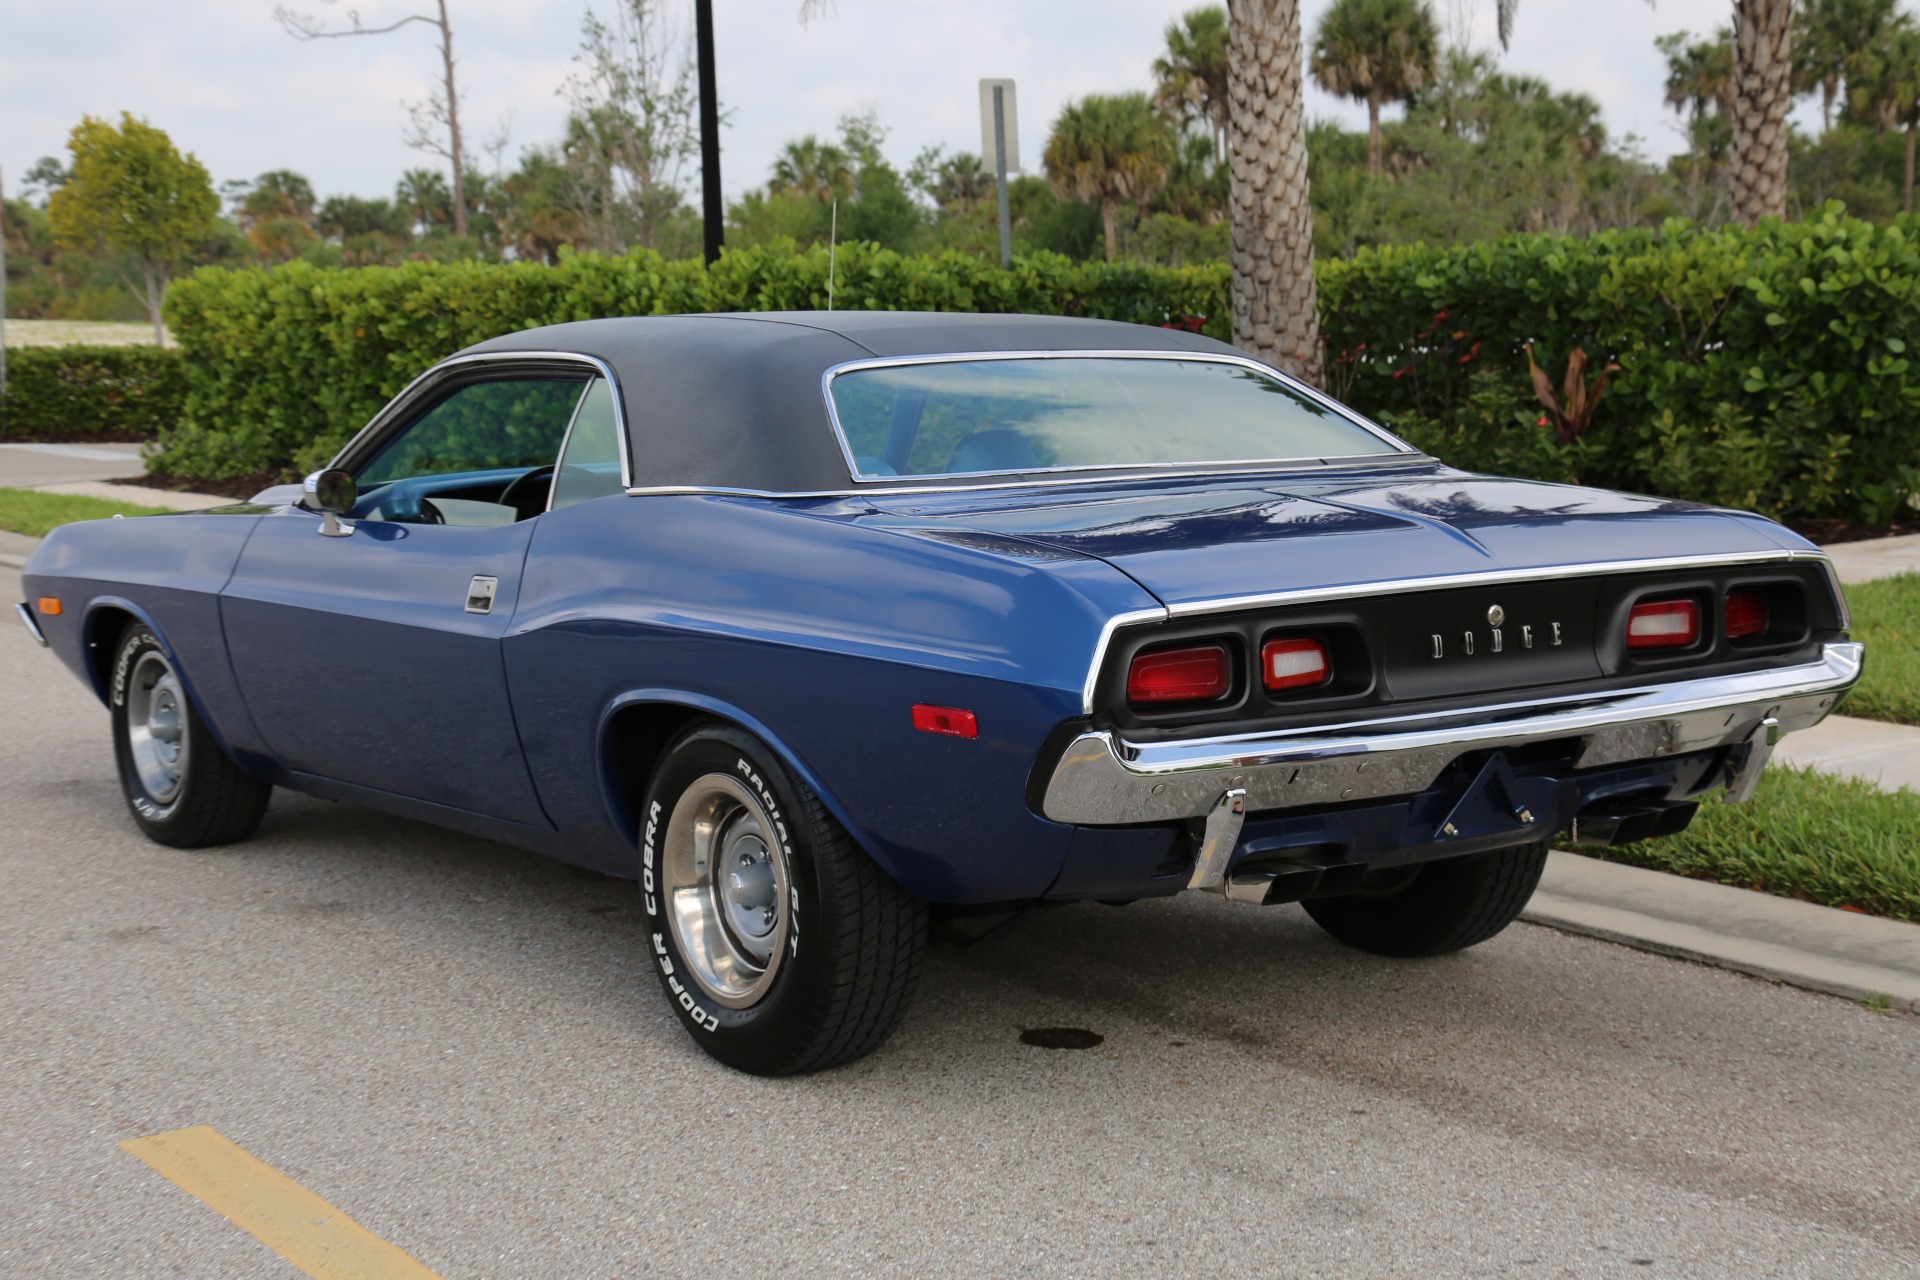 Used 1973 Dodge Challenger 360 V8 Automatic for sale Sold at Muscle Cars for Sale Inc. in Fort Myers FL 33912 5